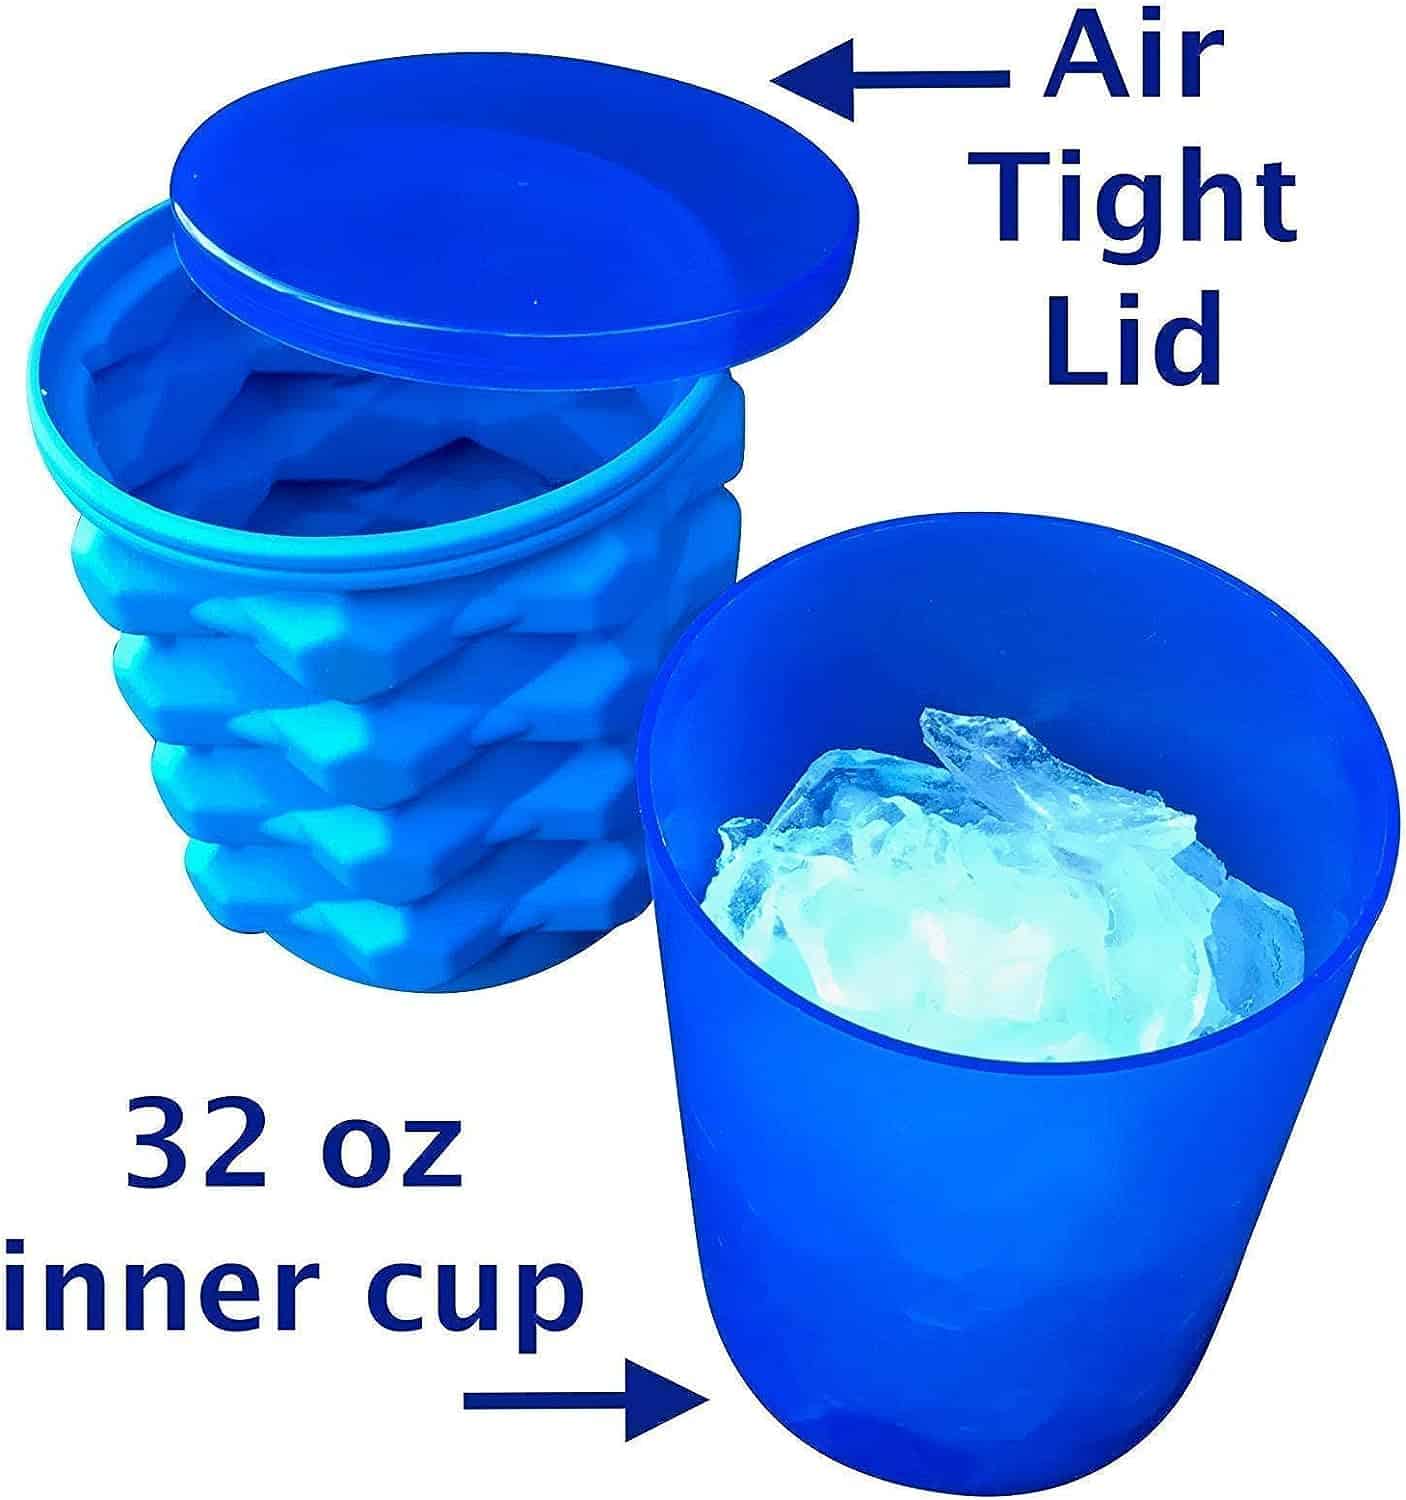 The Ultimate Ice Cube Maker Silicone Bucket with Lid Makes Small Size Nugget Ice Chips for Soft Drinks Cocktail Ice Wine On Ice Crushed Ice Maker Cylinder Ice Trays Ice Cup Maker Mold Ice Holder 3